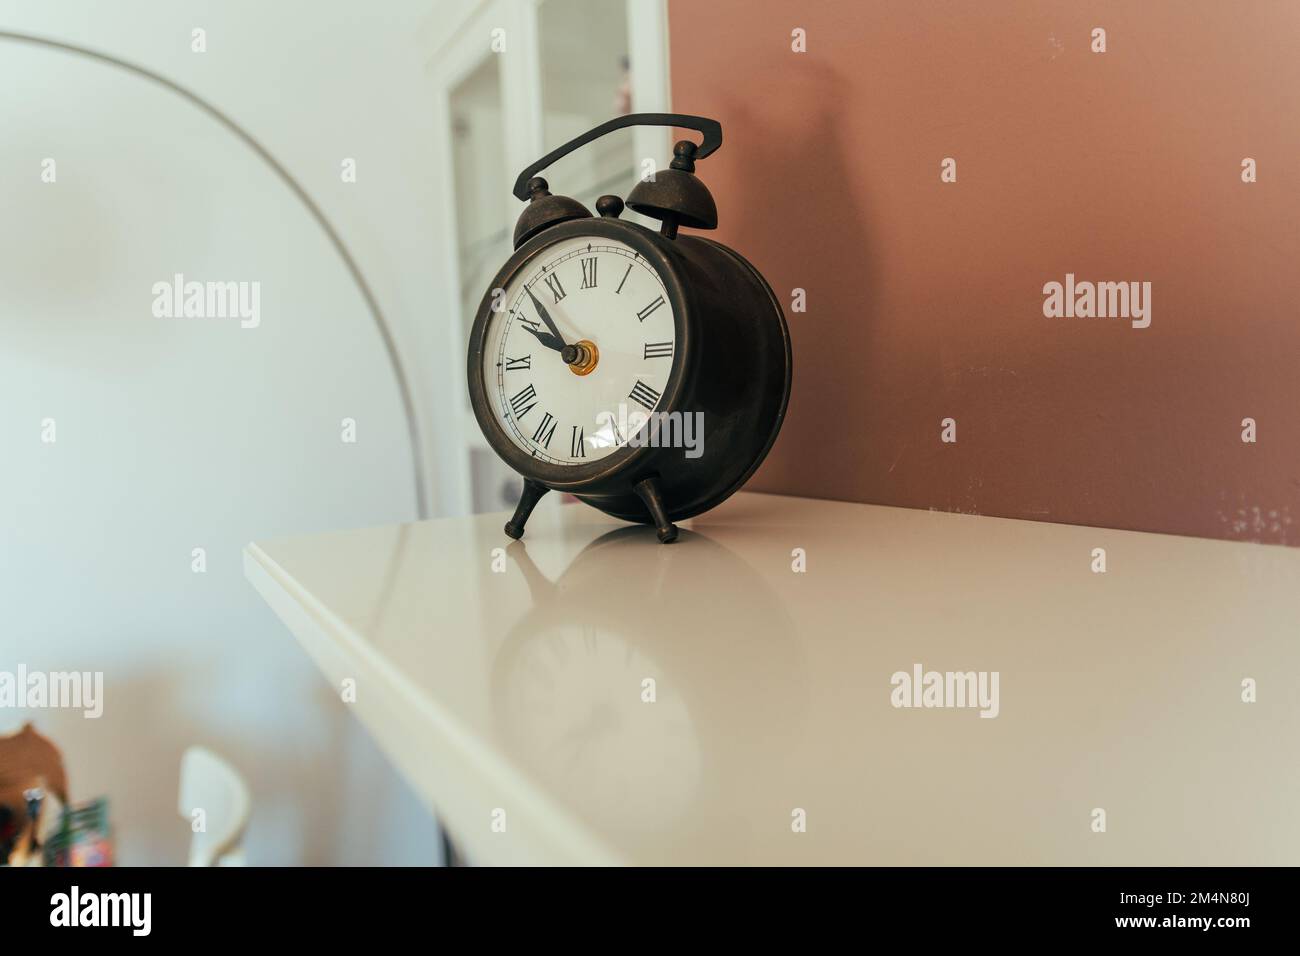 Alarm clock, vintage. An alarm clock with a linear and classic design. Stock Photo